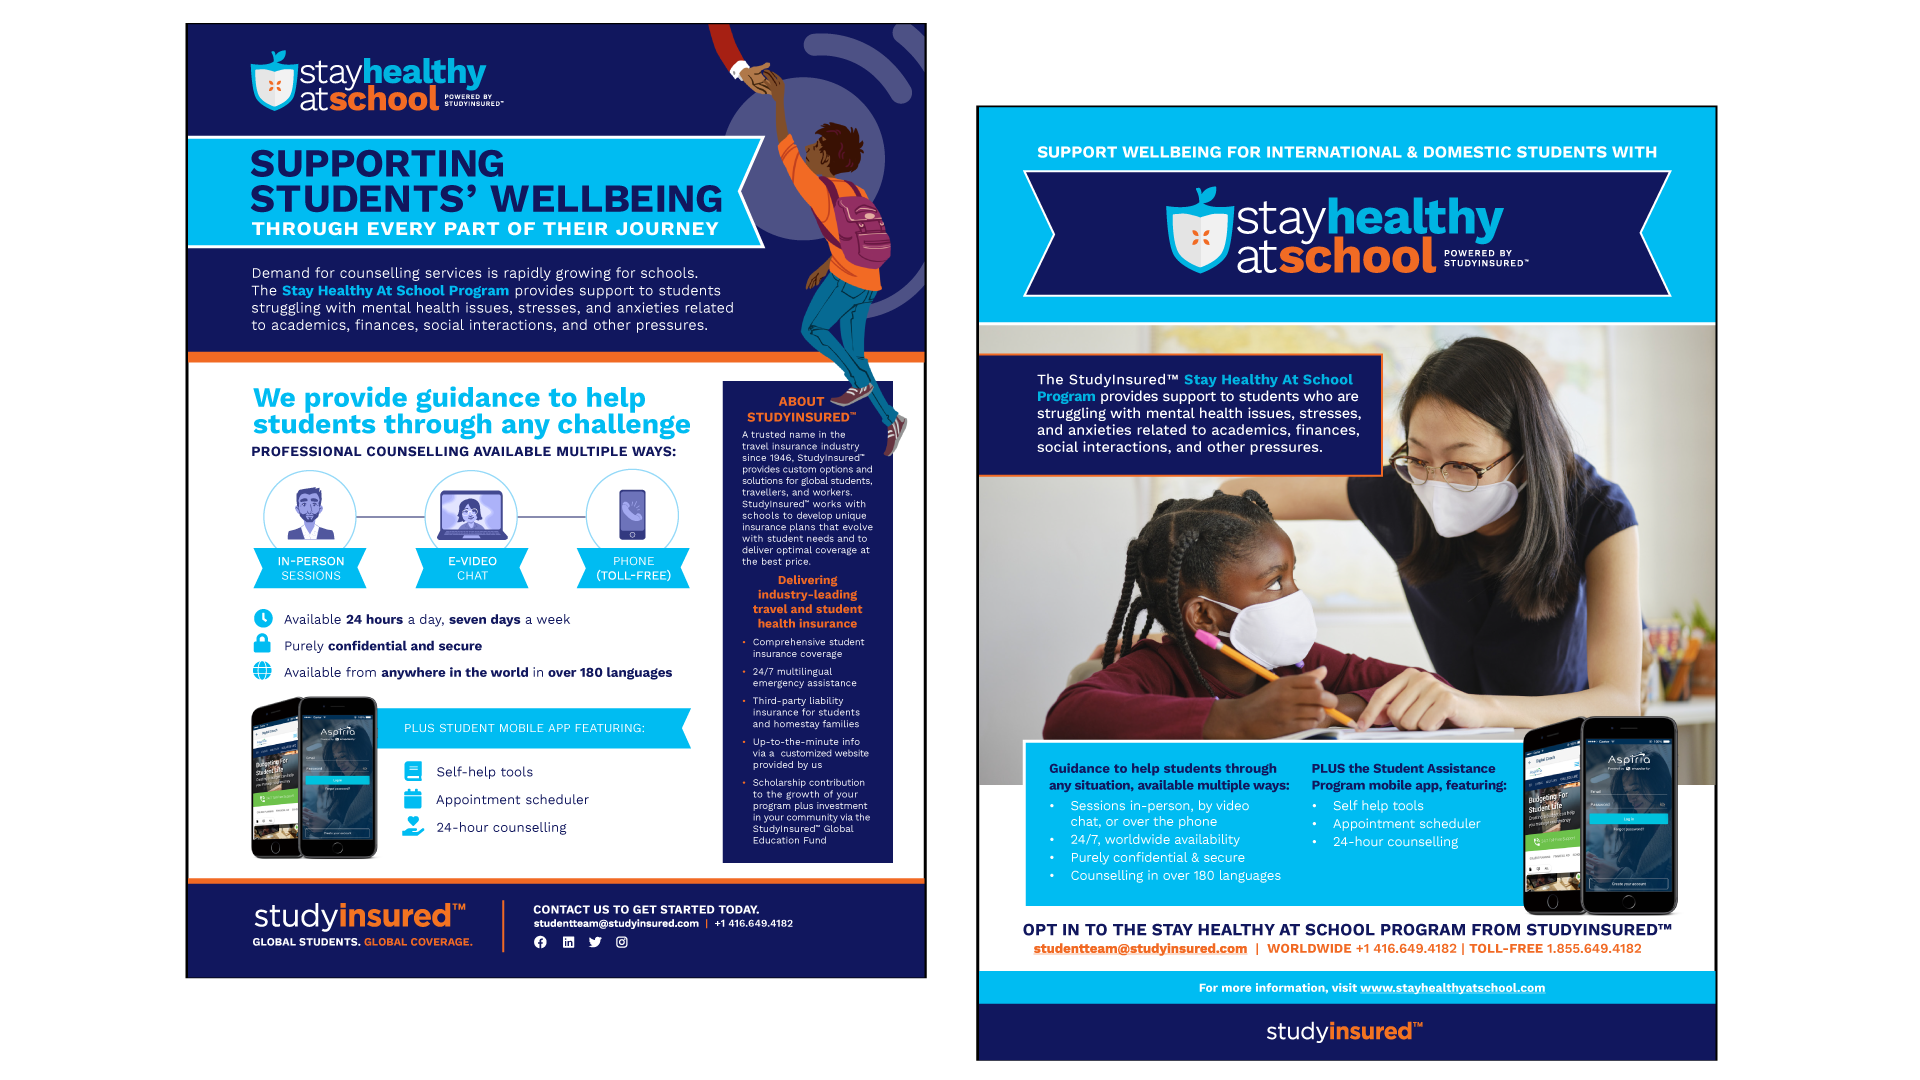 Print sell sheets for the Stay Healthy At School program